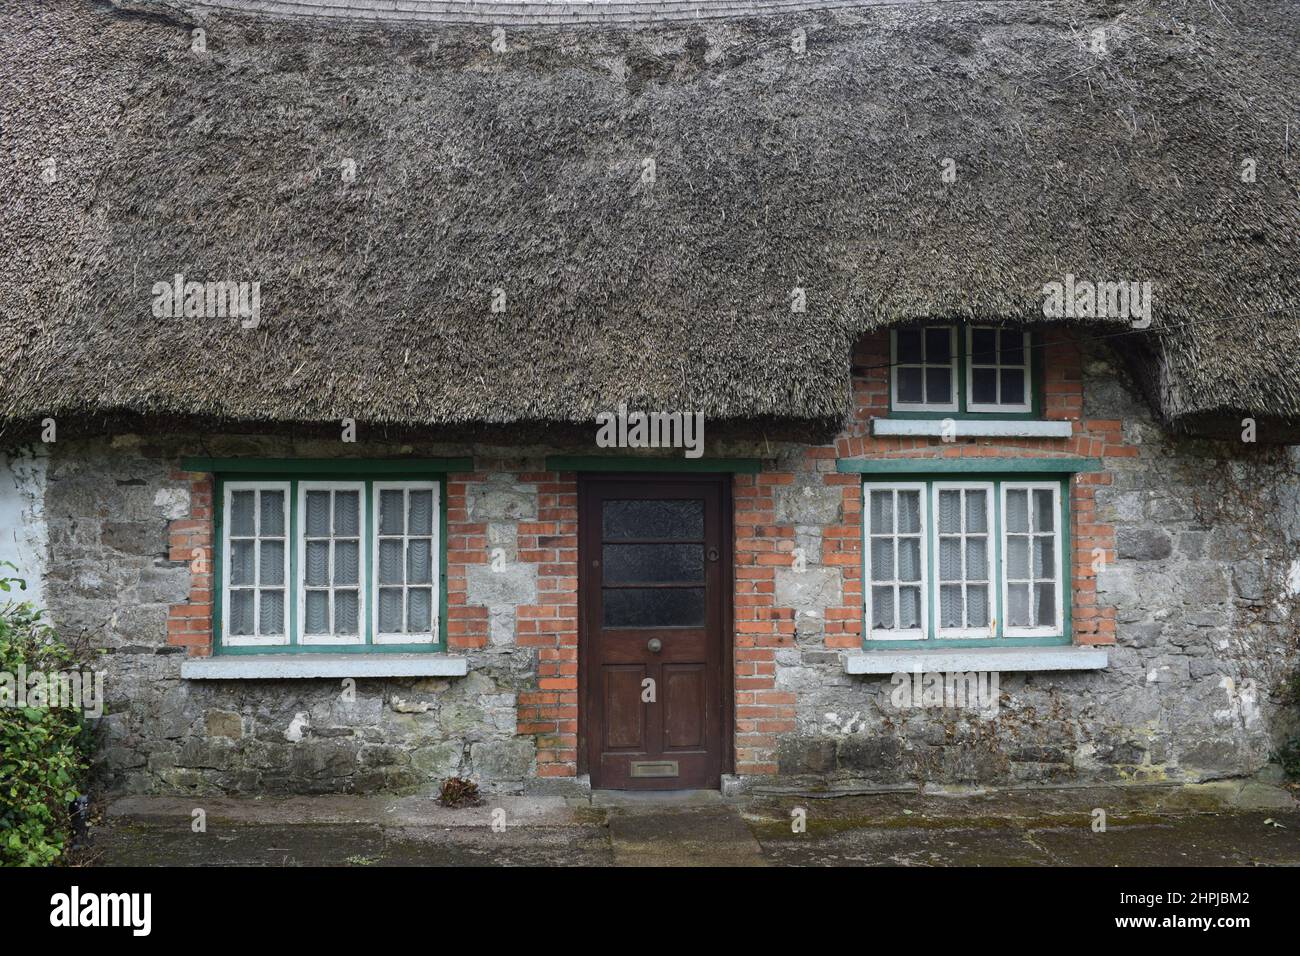 Typical Adare house close up. House close up with thatched roof and brown bricks. Adare Village. Ireland. Stock Photo